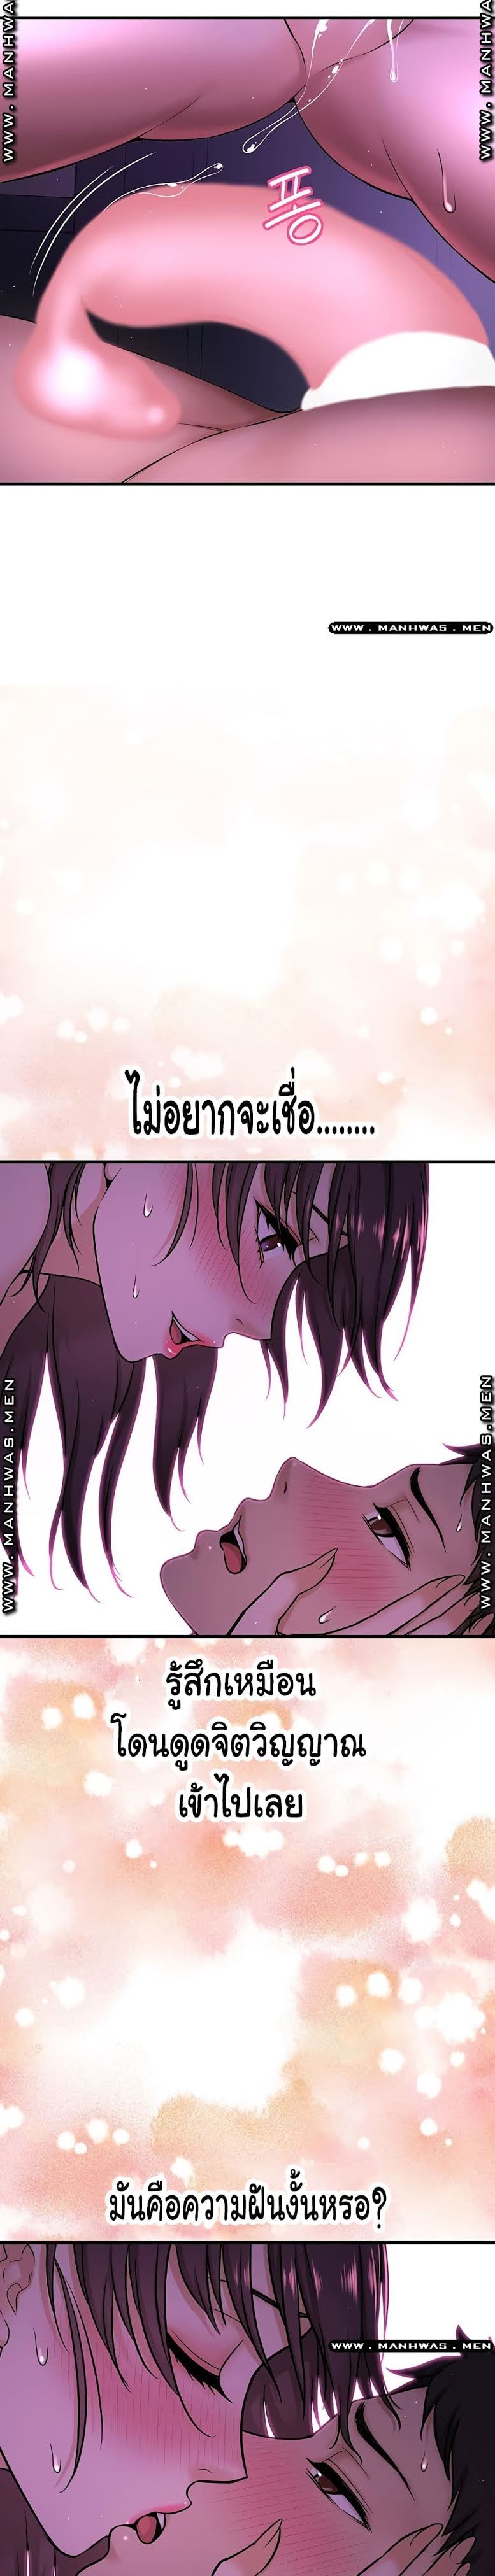 I Want to Know Her - หน้า 18